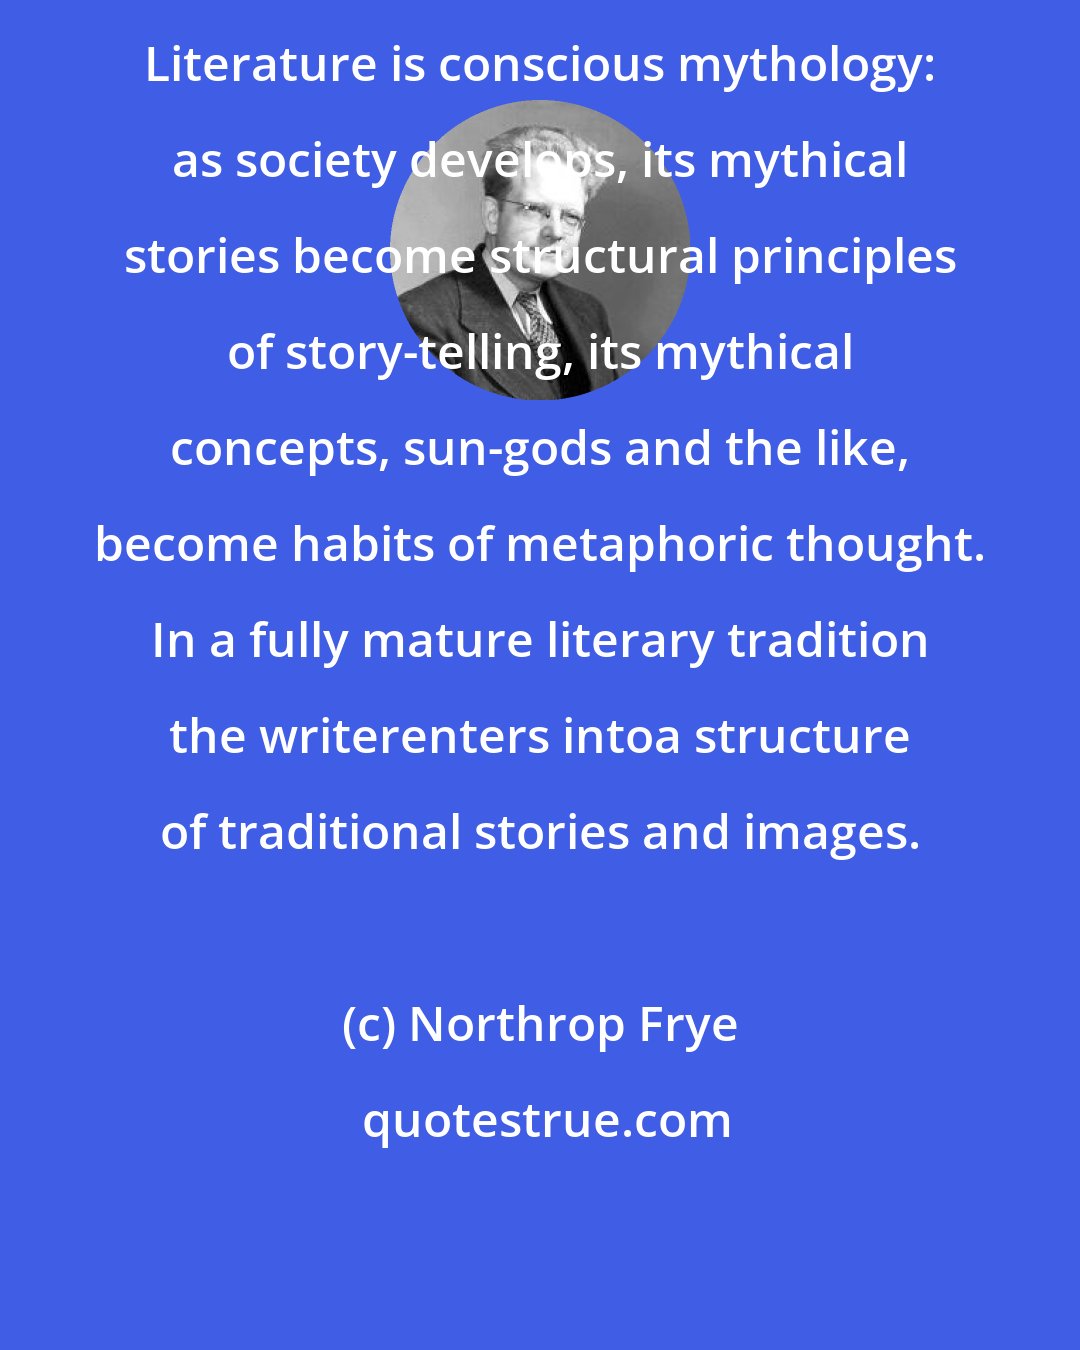 Northrop Frye: Literature is conscious mythology: as society develops, its mythical stories become structural principles of story-telling, its mythical concepts, sun-gods and the like, become habits of metaphoric thought. In a fully mature literary tradition the writerenters intoa structure of traditional stories and images.